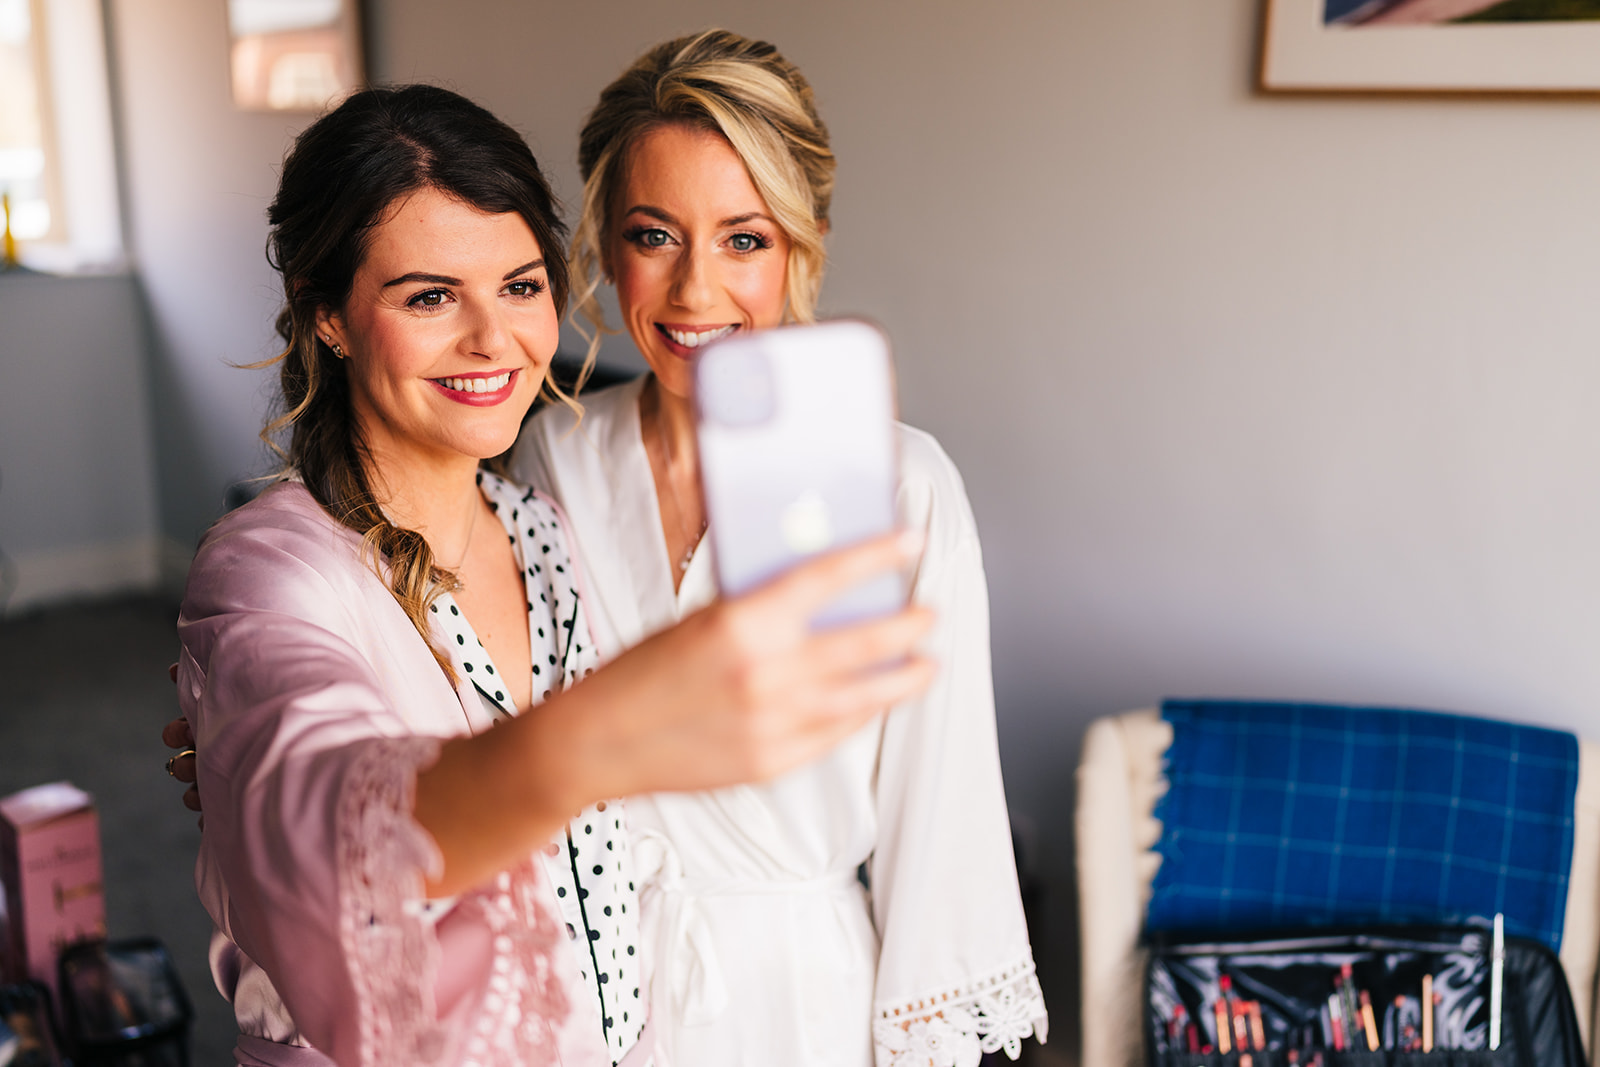 Hazel Gap Wedding Photography - the bride and a friend taking a selfie on the wedding day